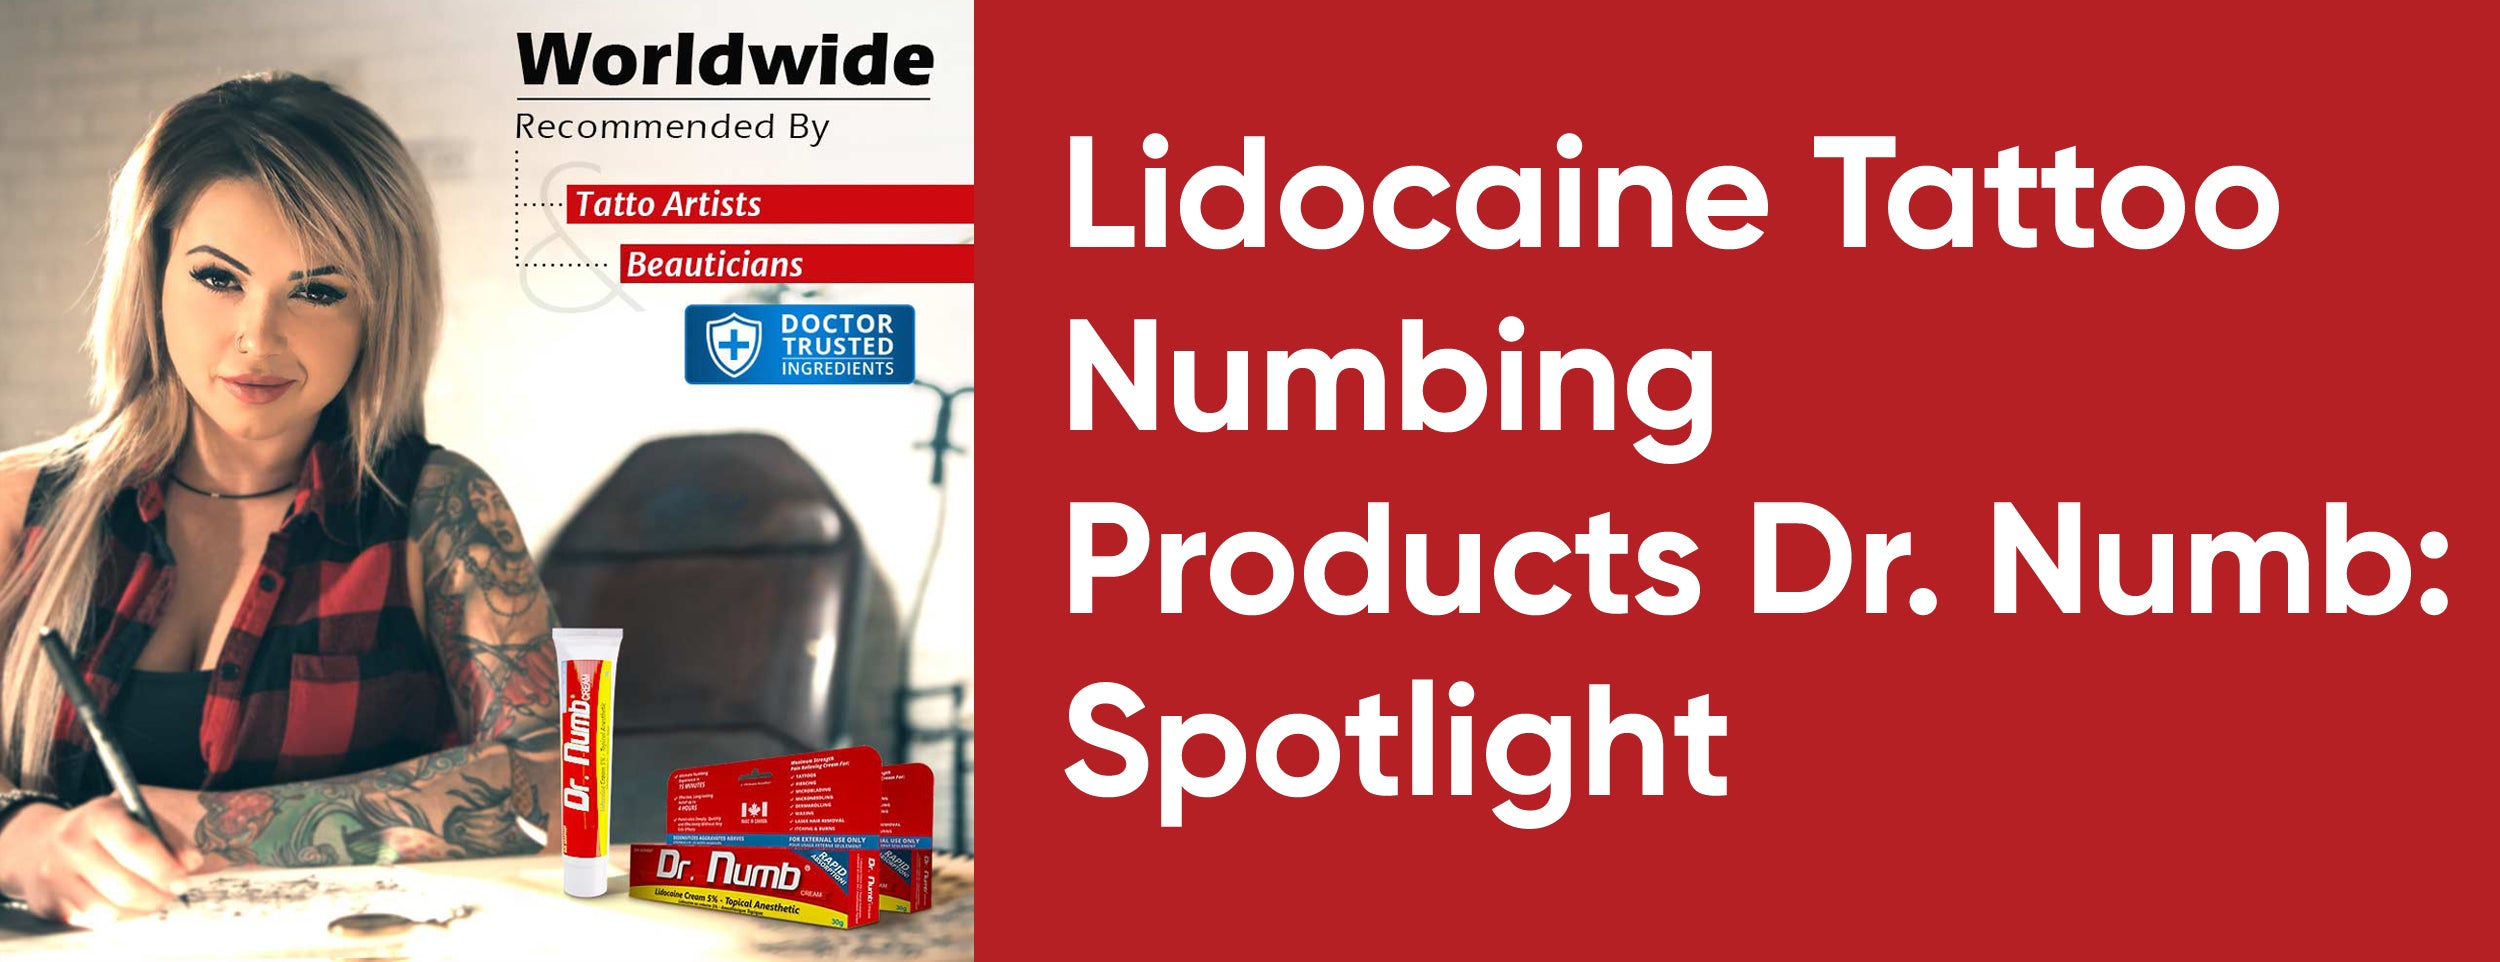 Dr. Numb's Lidocaine Tattoo Numbing Products